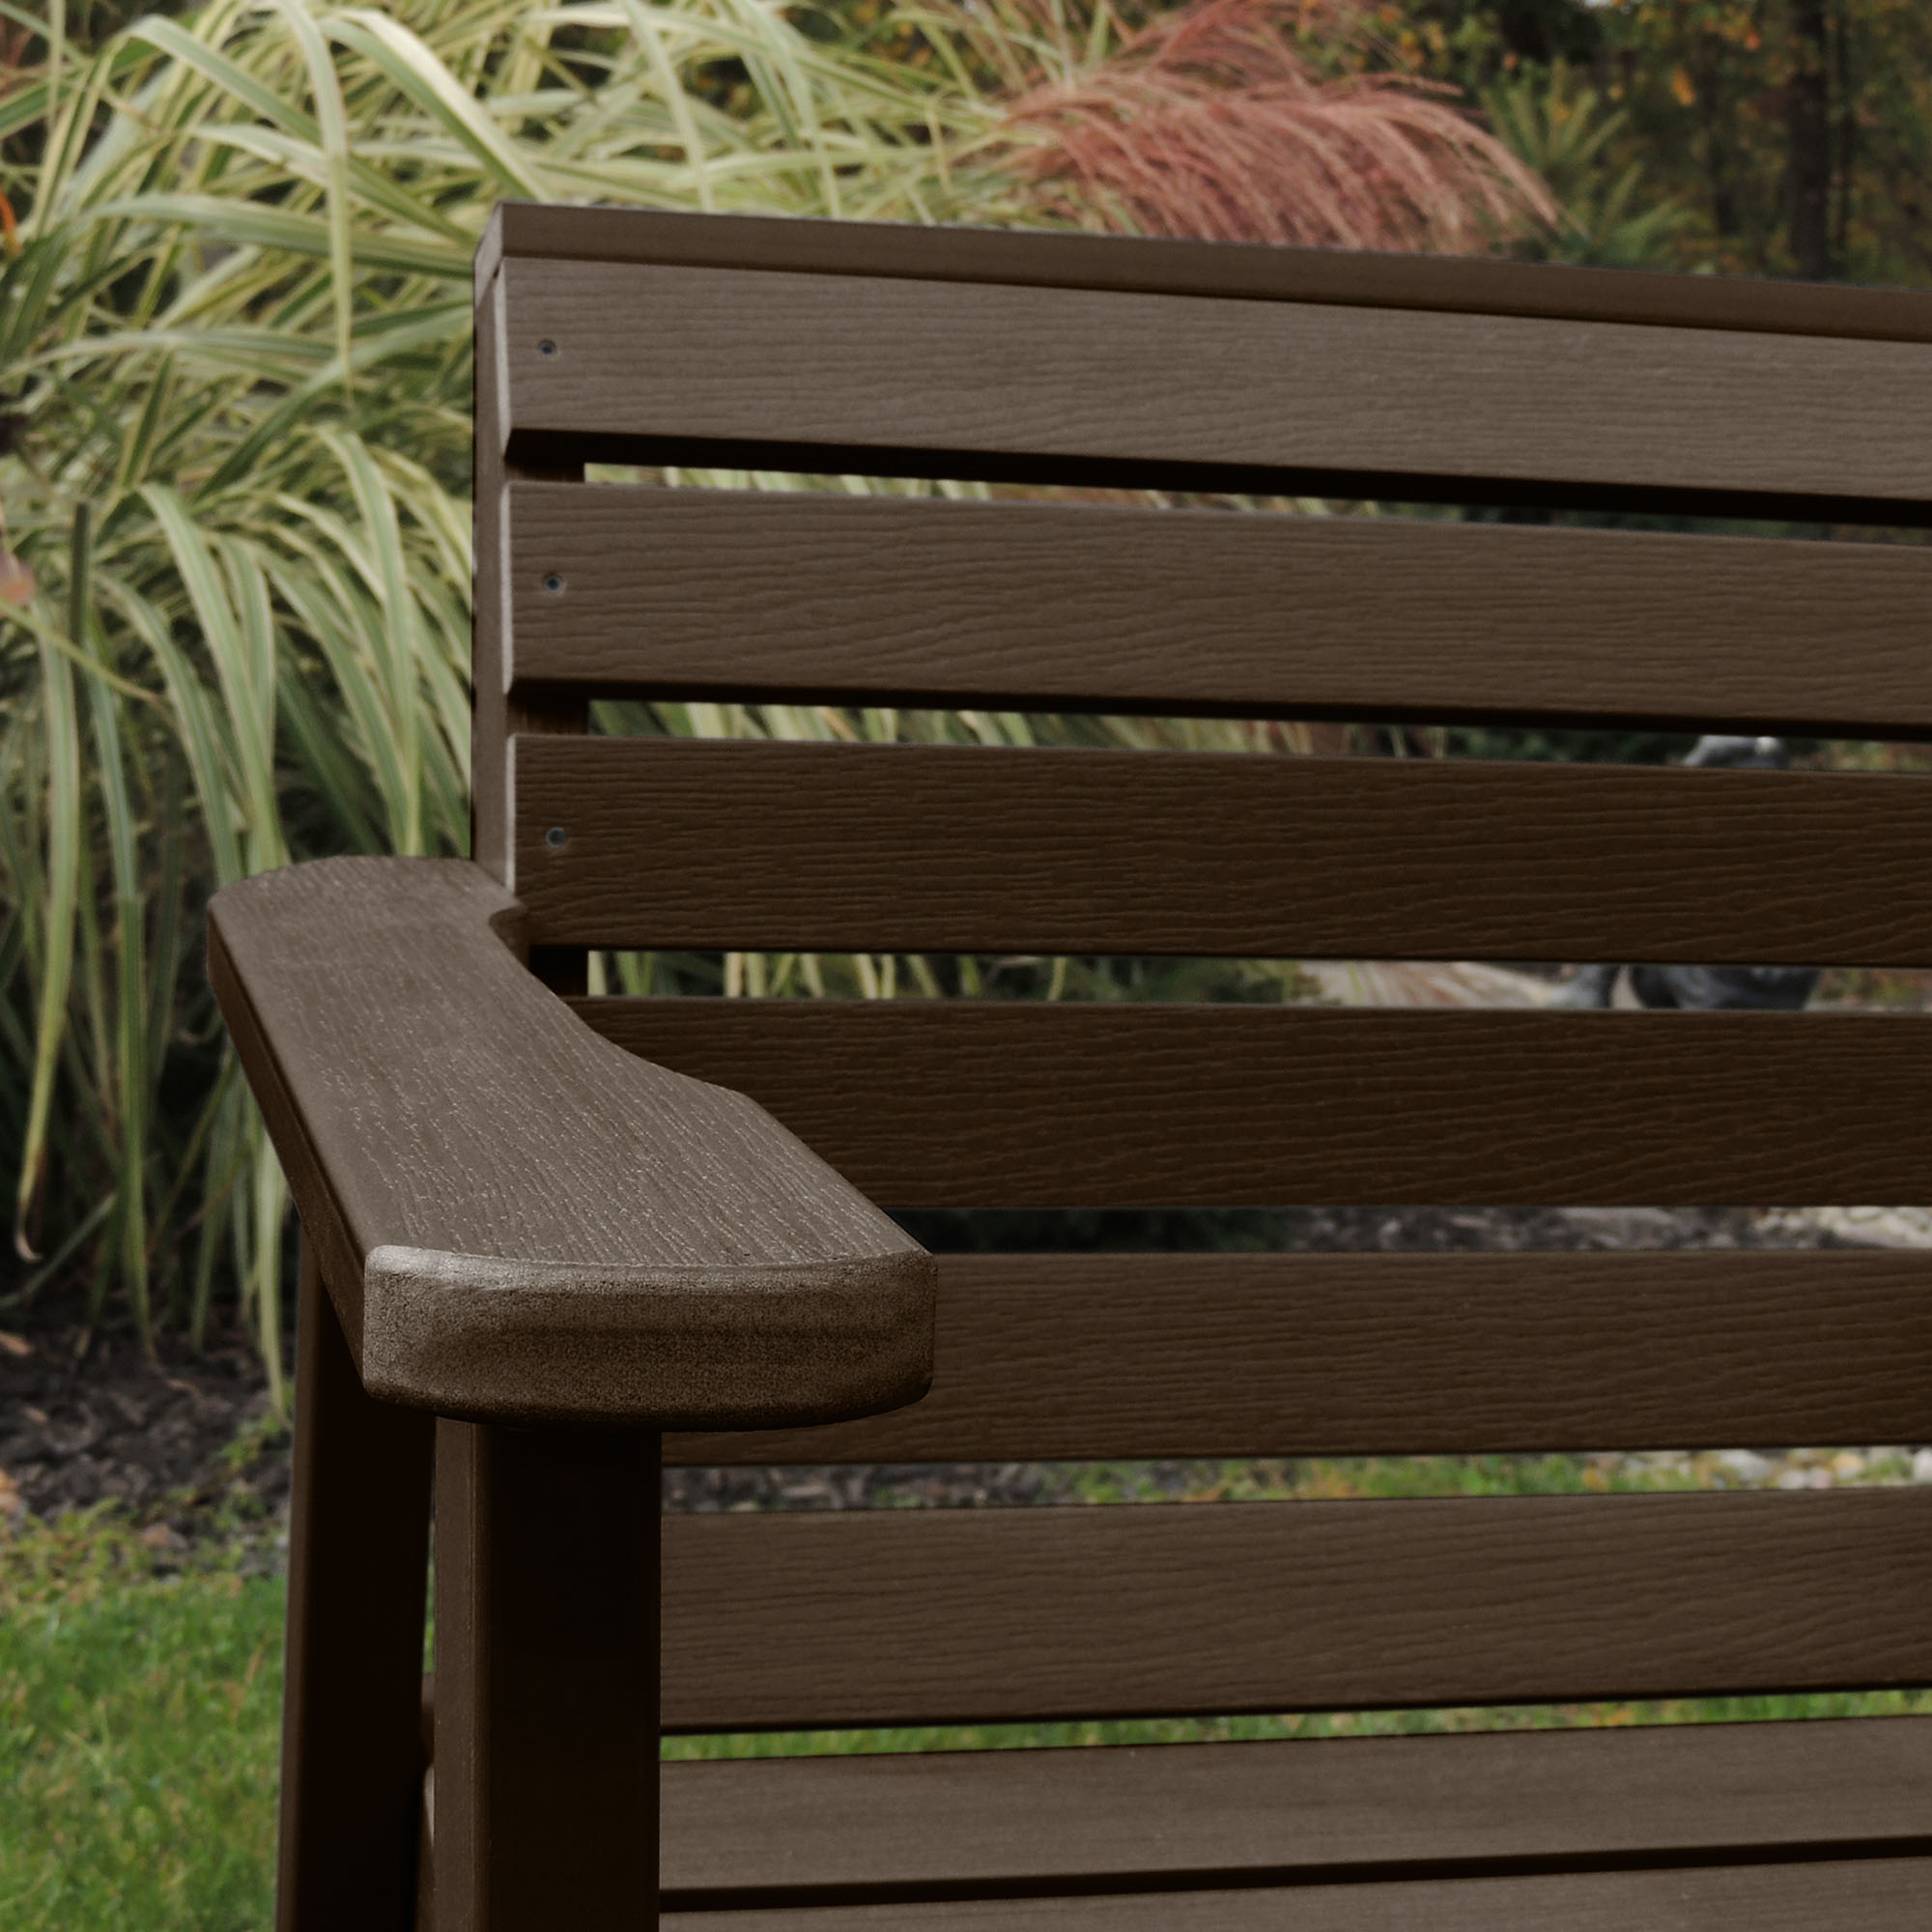 Highwood Weatherly Garden Chair - image 2 of 5